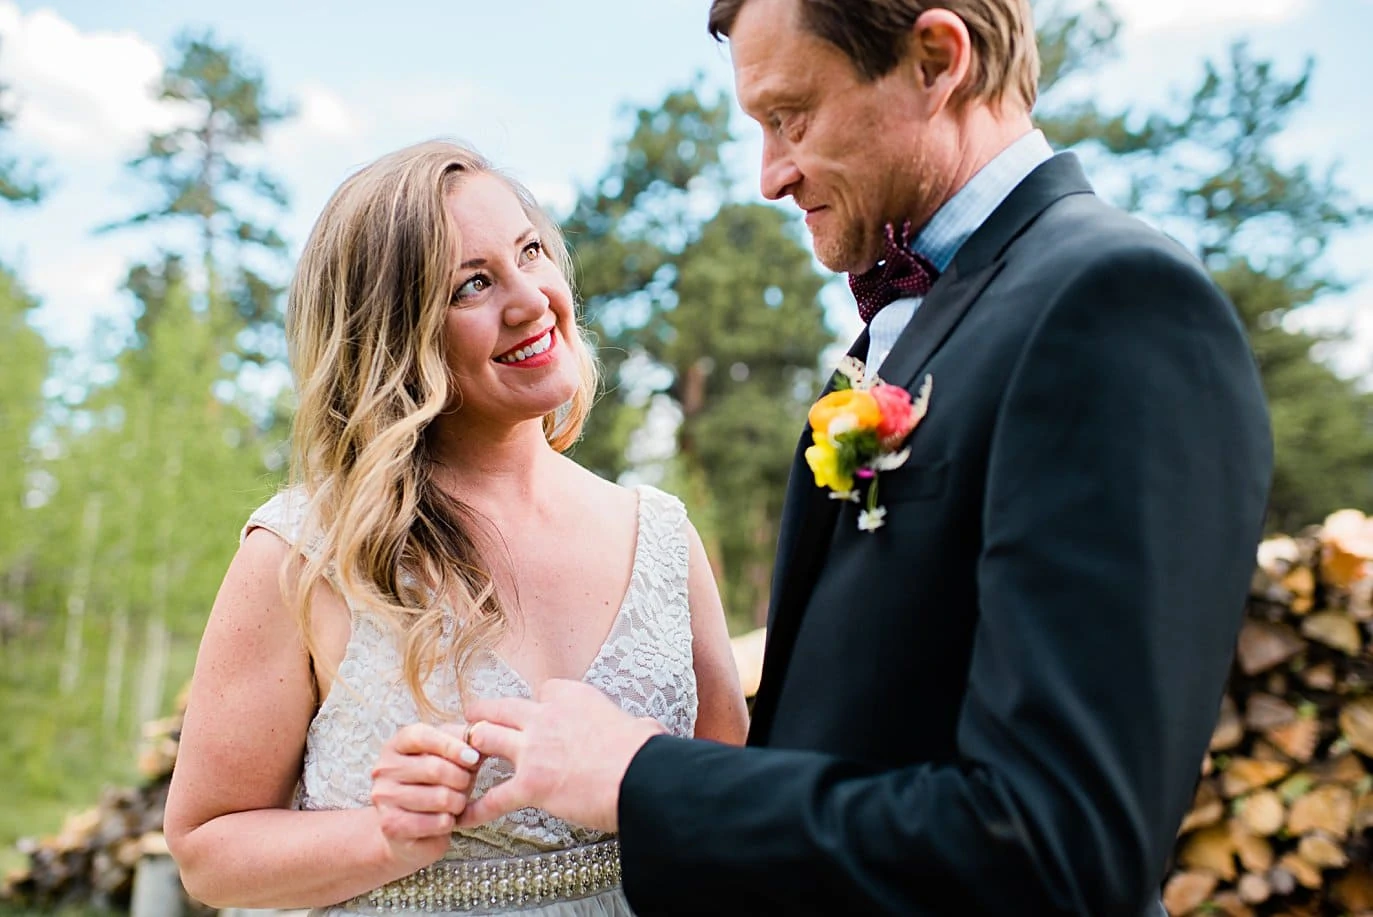 ring exchange during wedding vows at private property Golden elopement by Golden wedding photographer Jennie Crate